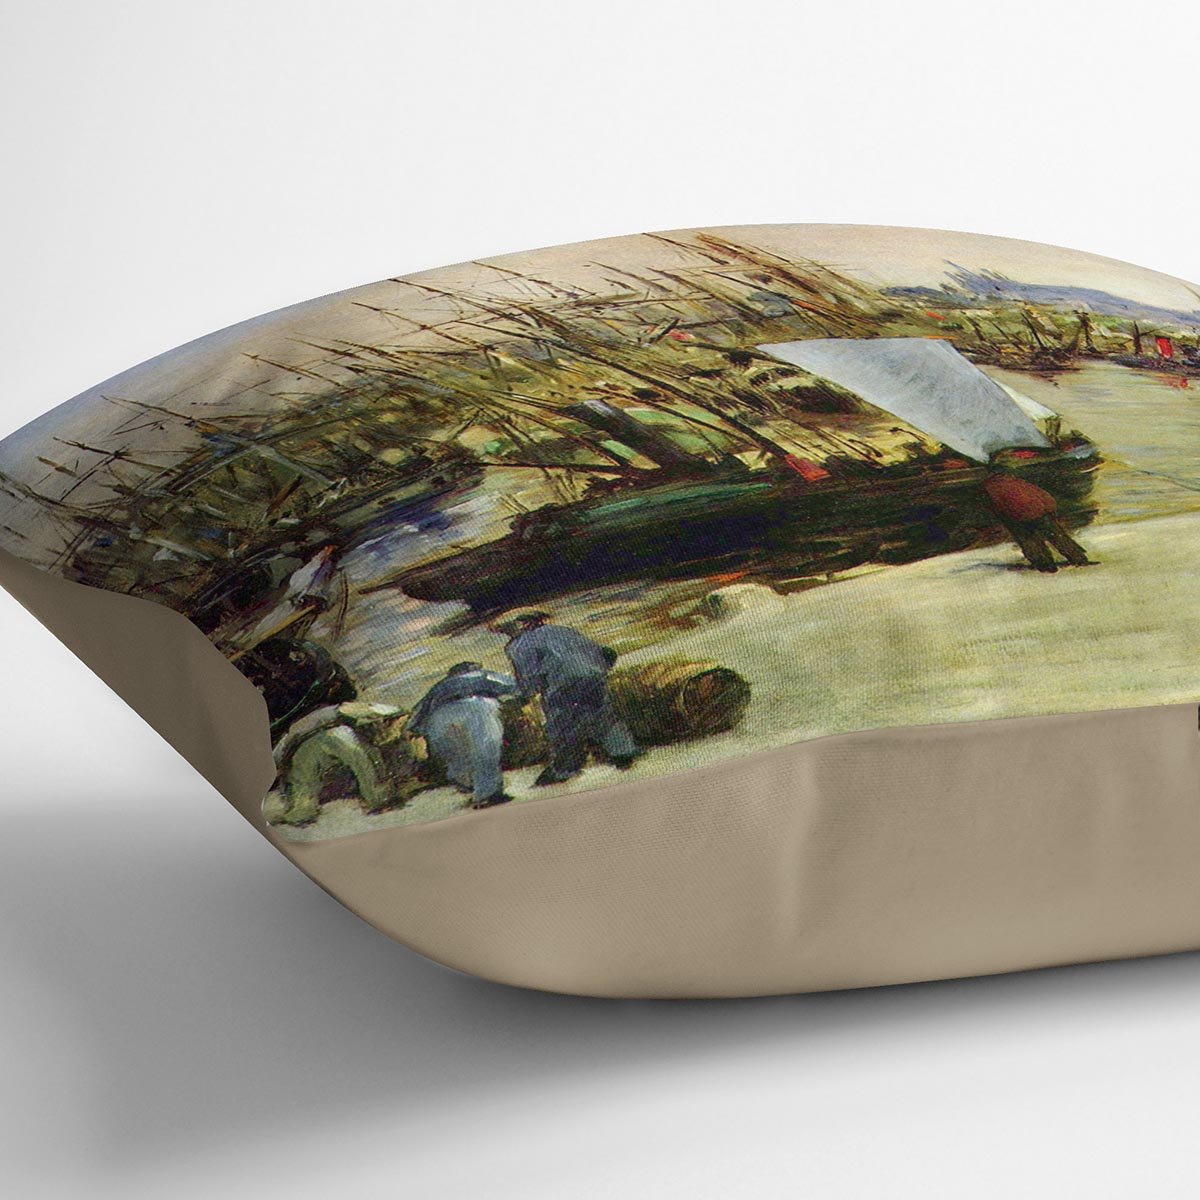 Port of Bordeaux by Manet Throw Pillow